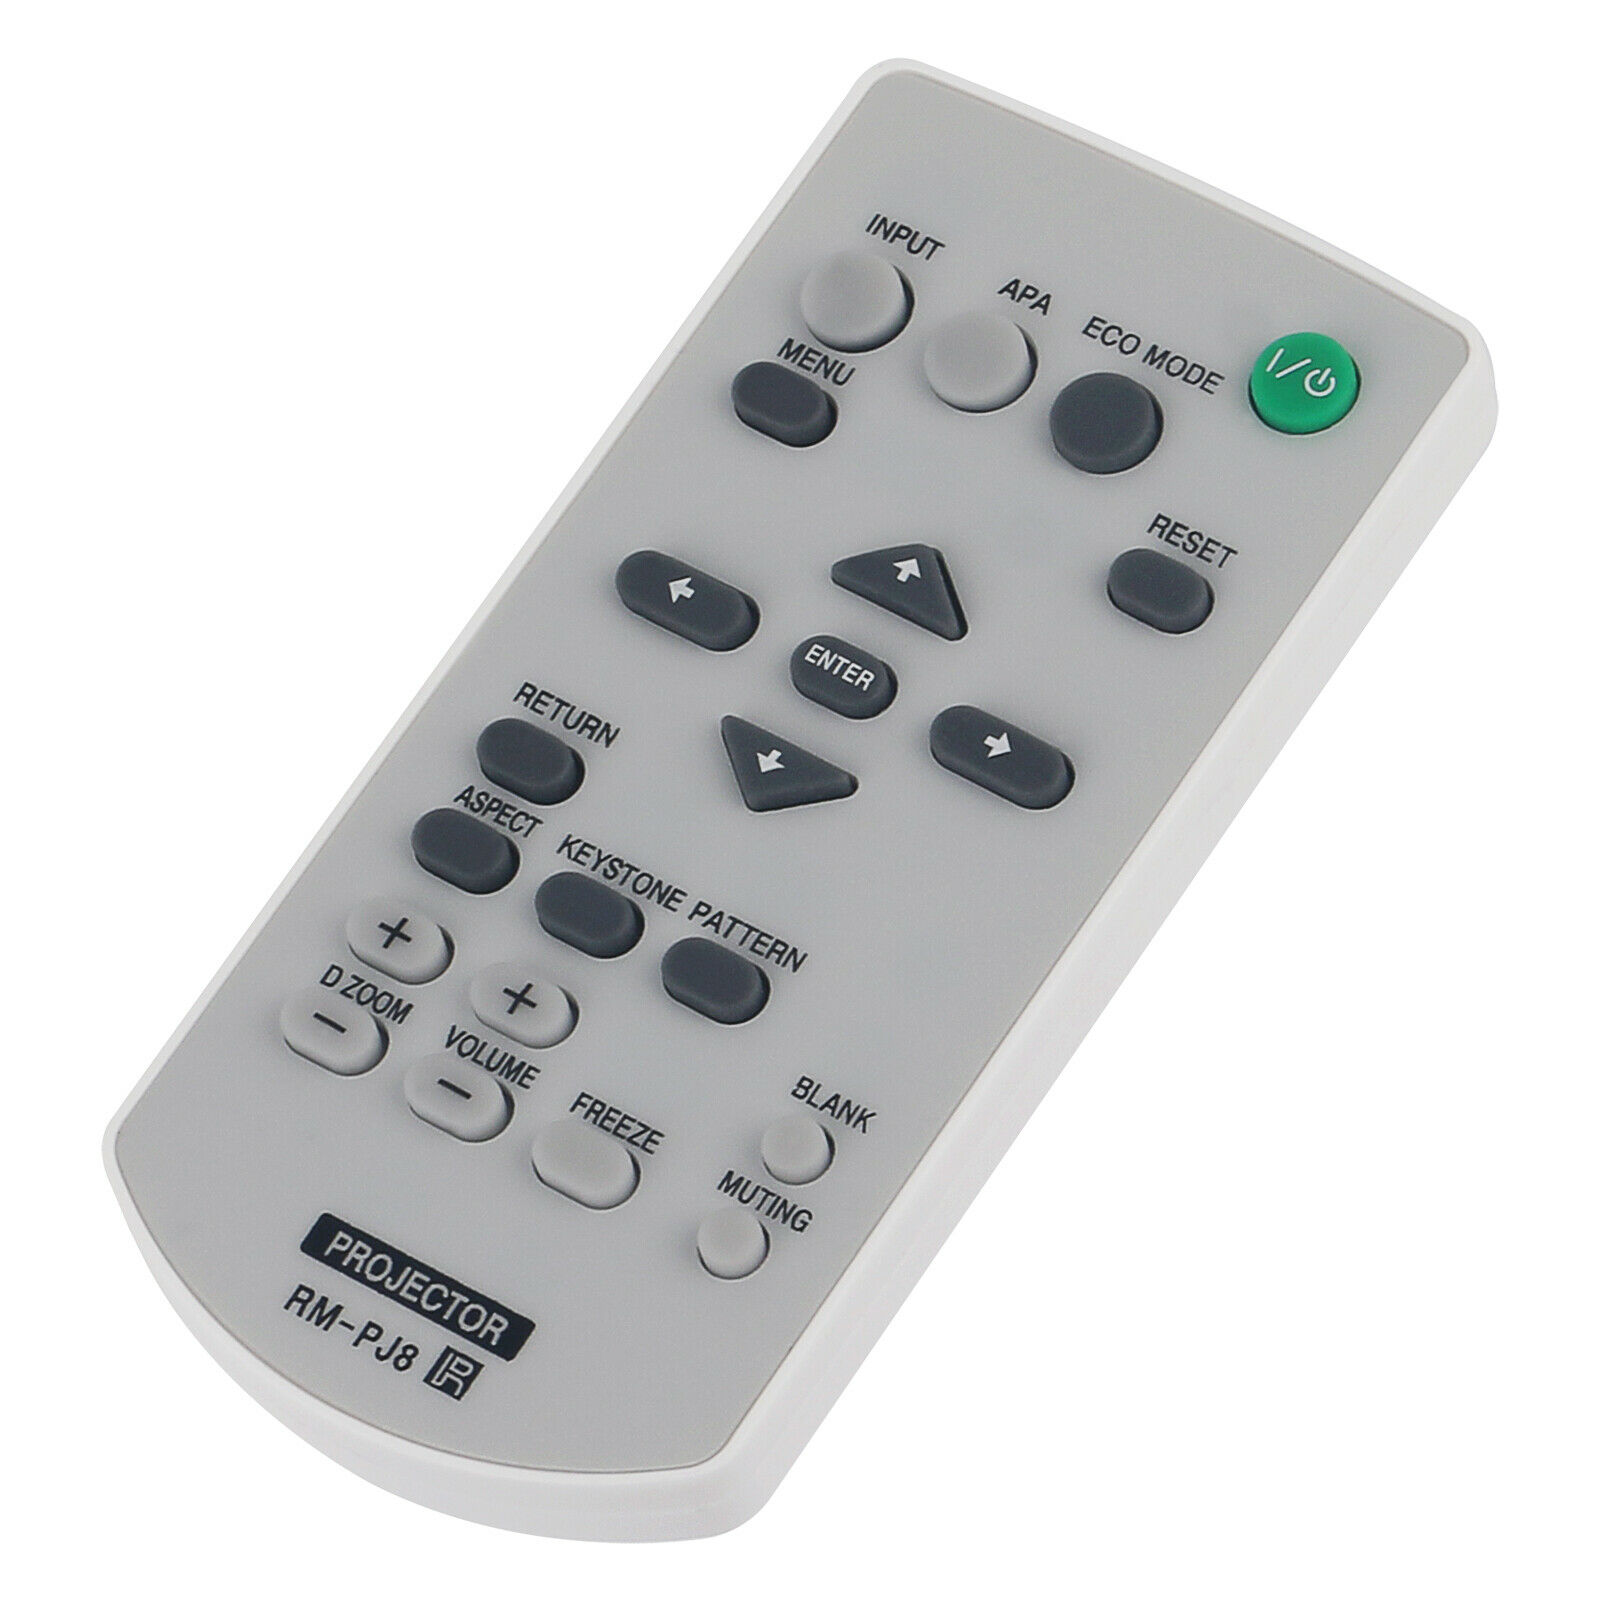 RM-PJ8 Replace Remote for Sony Projector VPL-CH350 VPL-CH375 VPL-CH370 VPL-CH355 - image 5 of 5